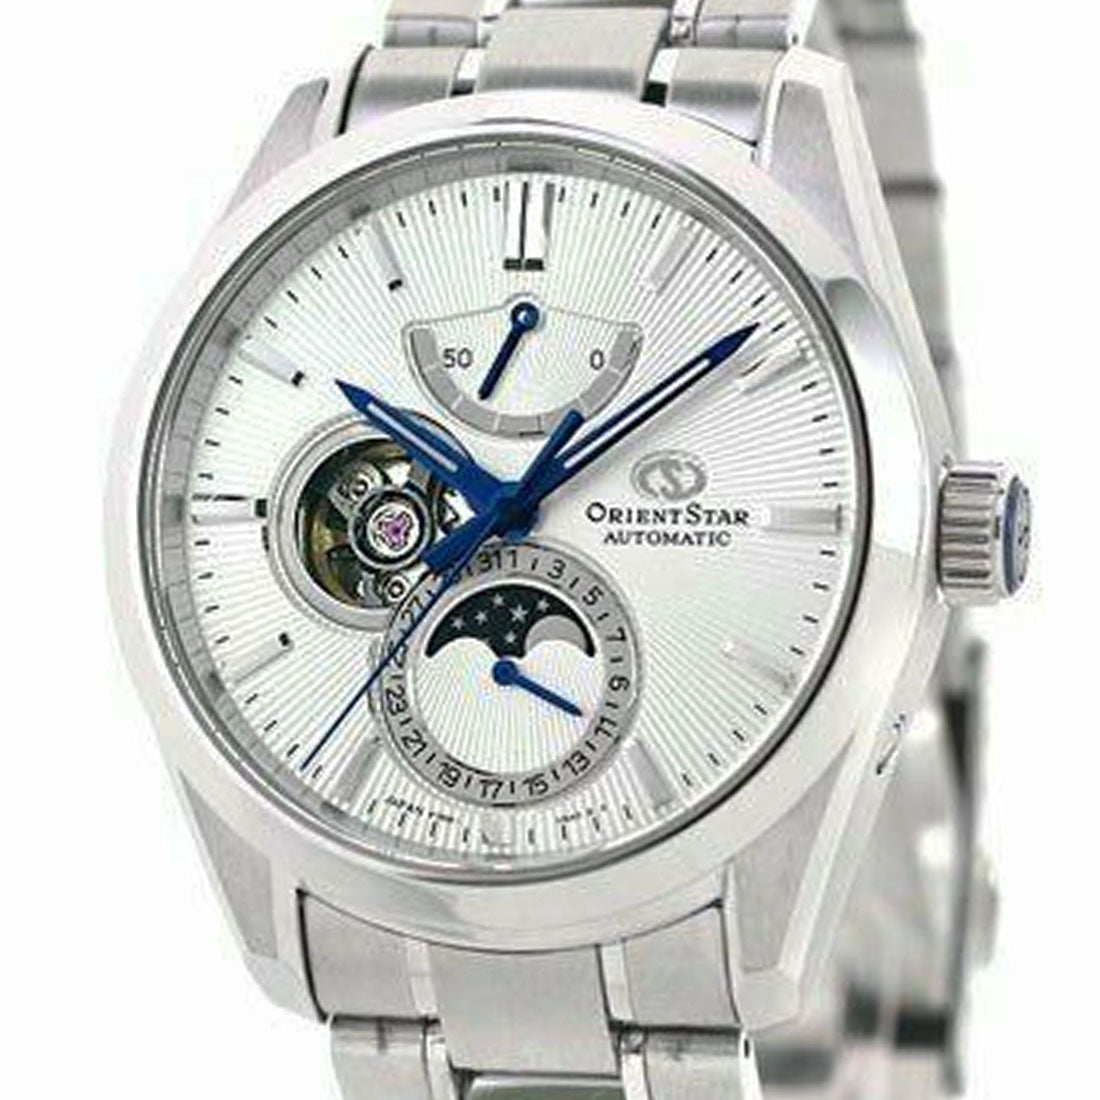 Orient Star Moon Phase White Dial Classic Watch RE-AY0002S RE-AY0002S00B -Orient